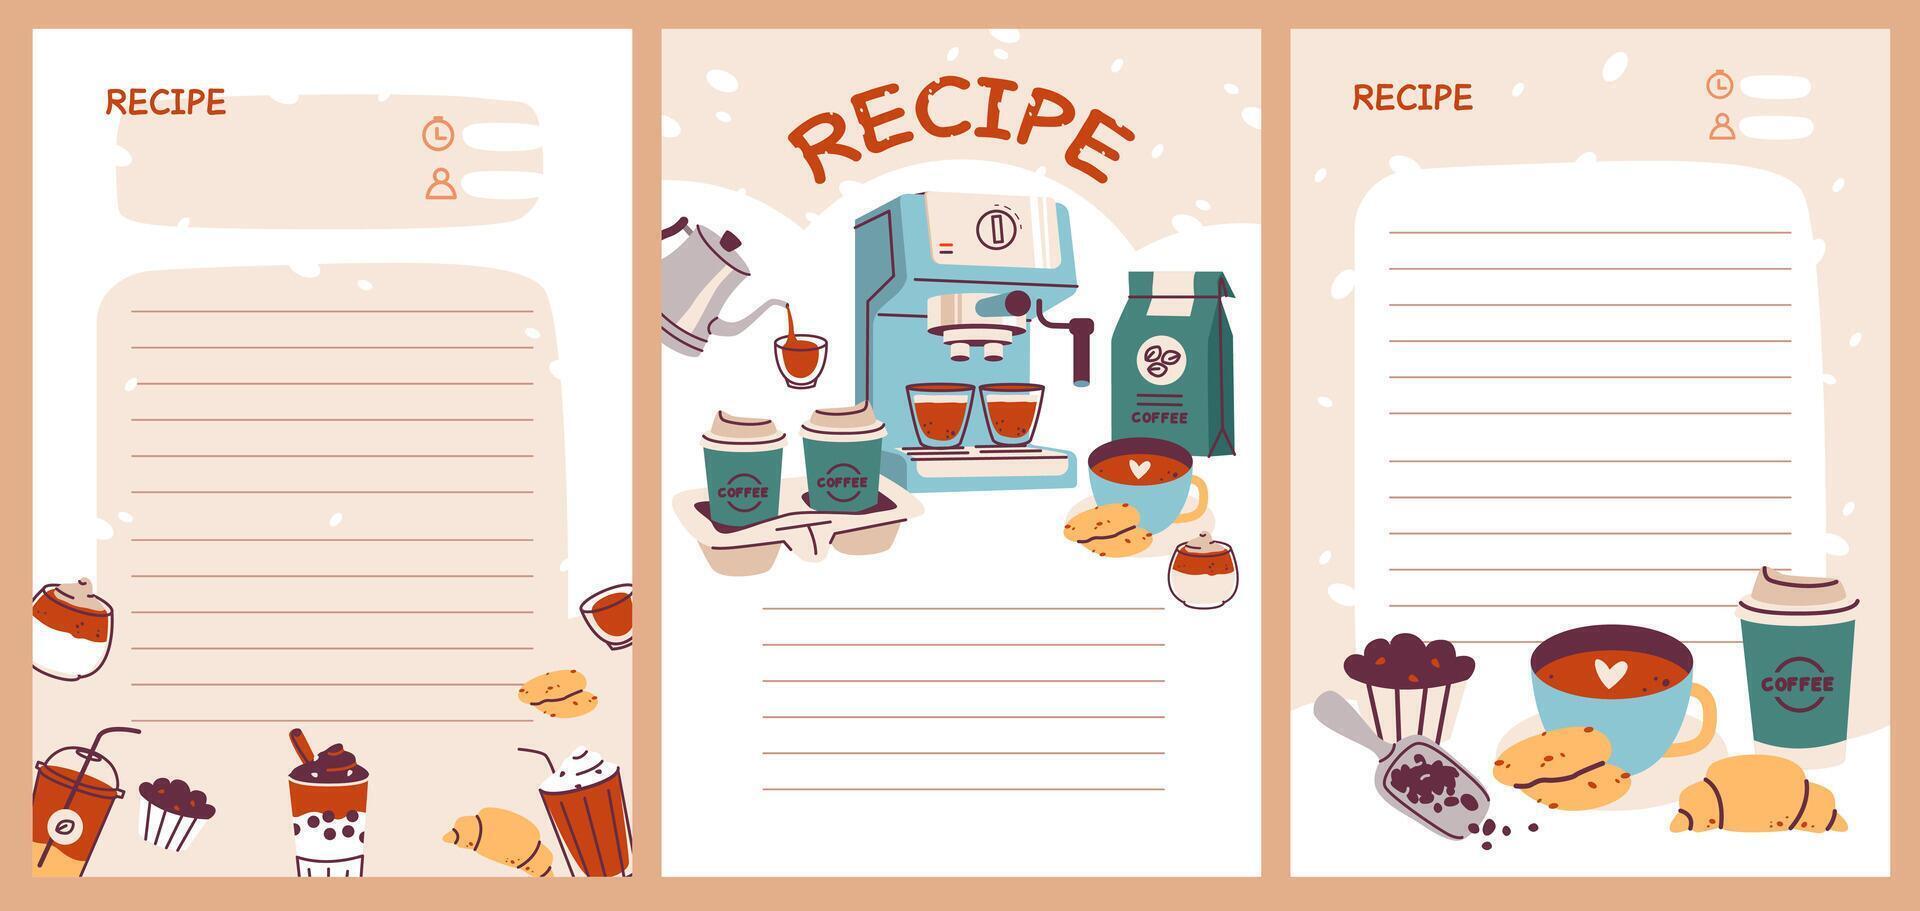 Recipe cards with different types of coffee and coffee machine. Template cookbook sheets for recipe, notes on cooking and ingredients. Flat vector illustration in minimalistic style